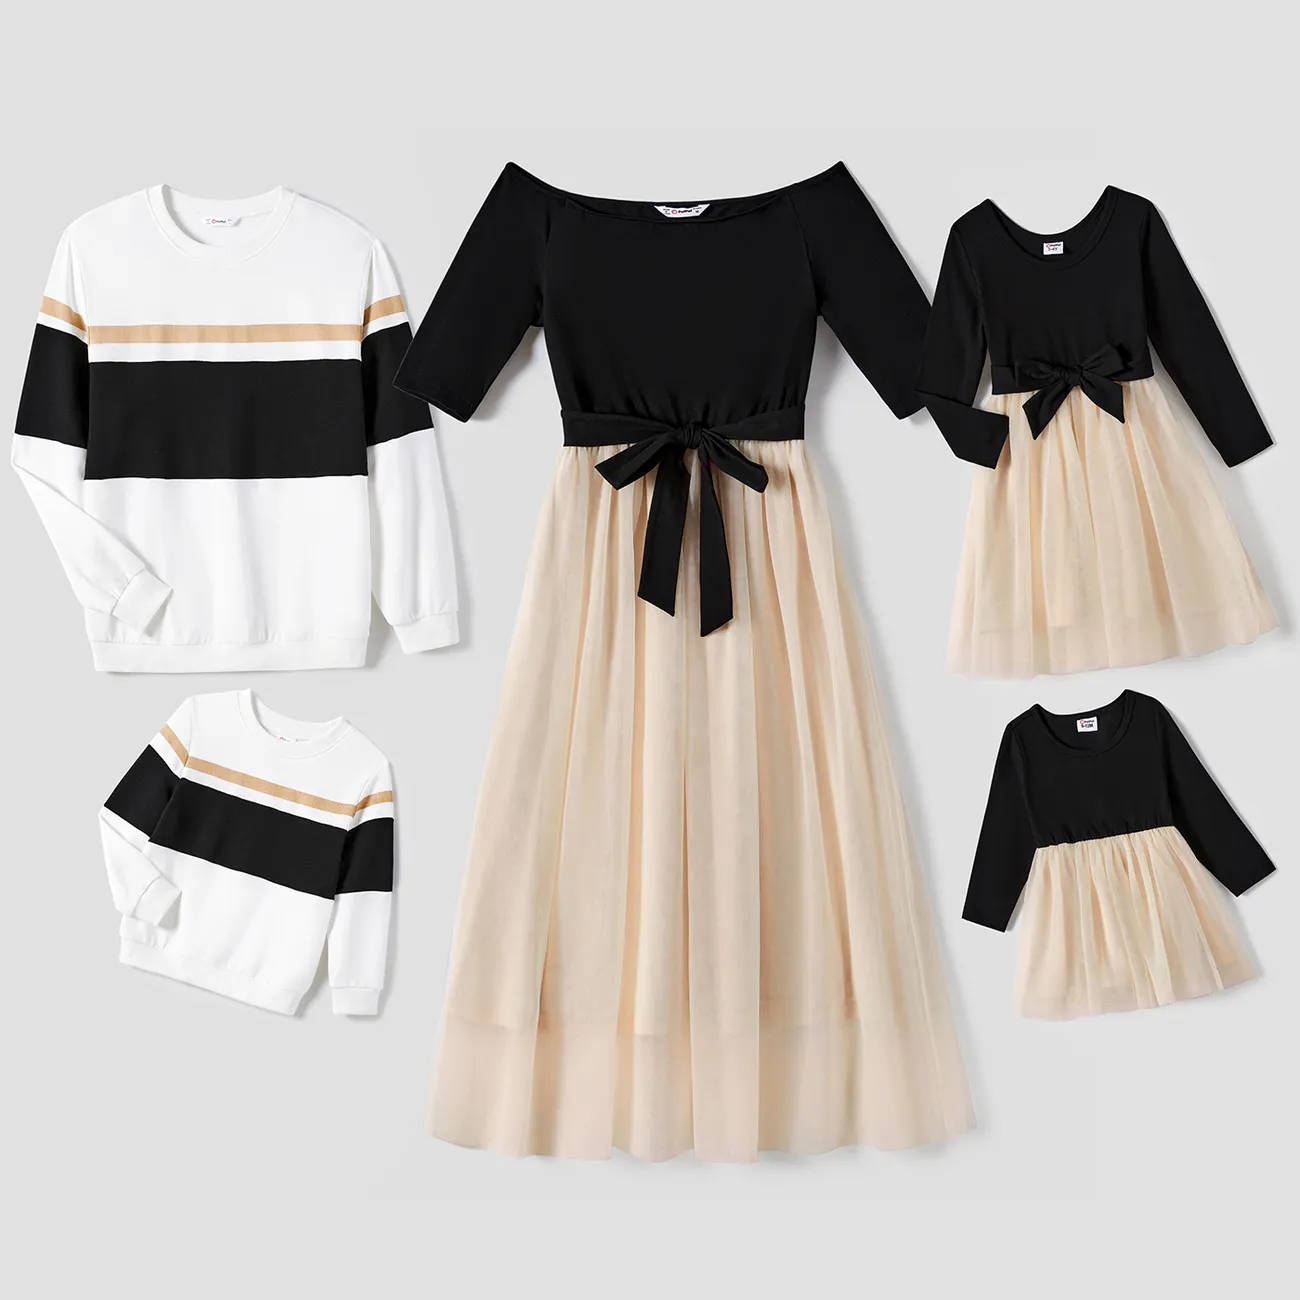 Family Matching Black-Almond Mesh Skirt and Classic Round Neck Long Sleeve Tops Sets Black big image 1